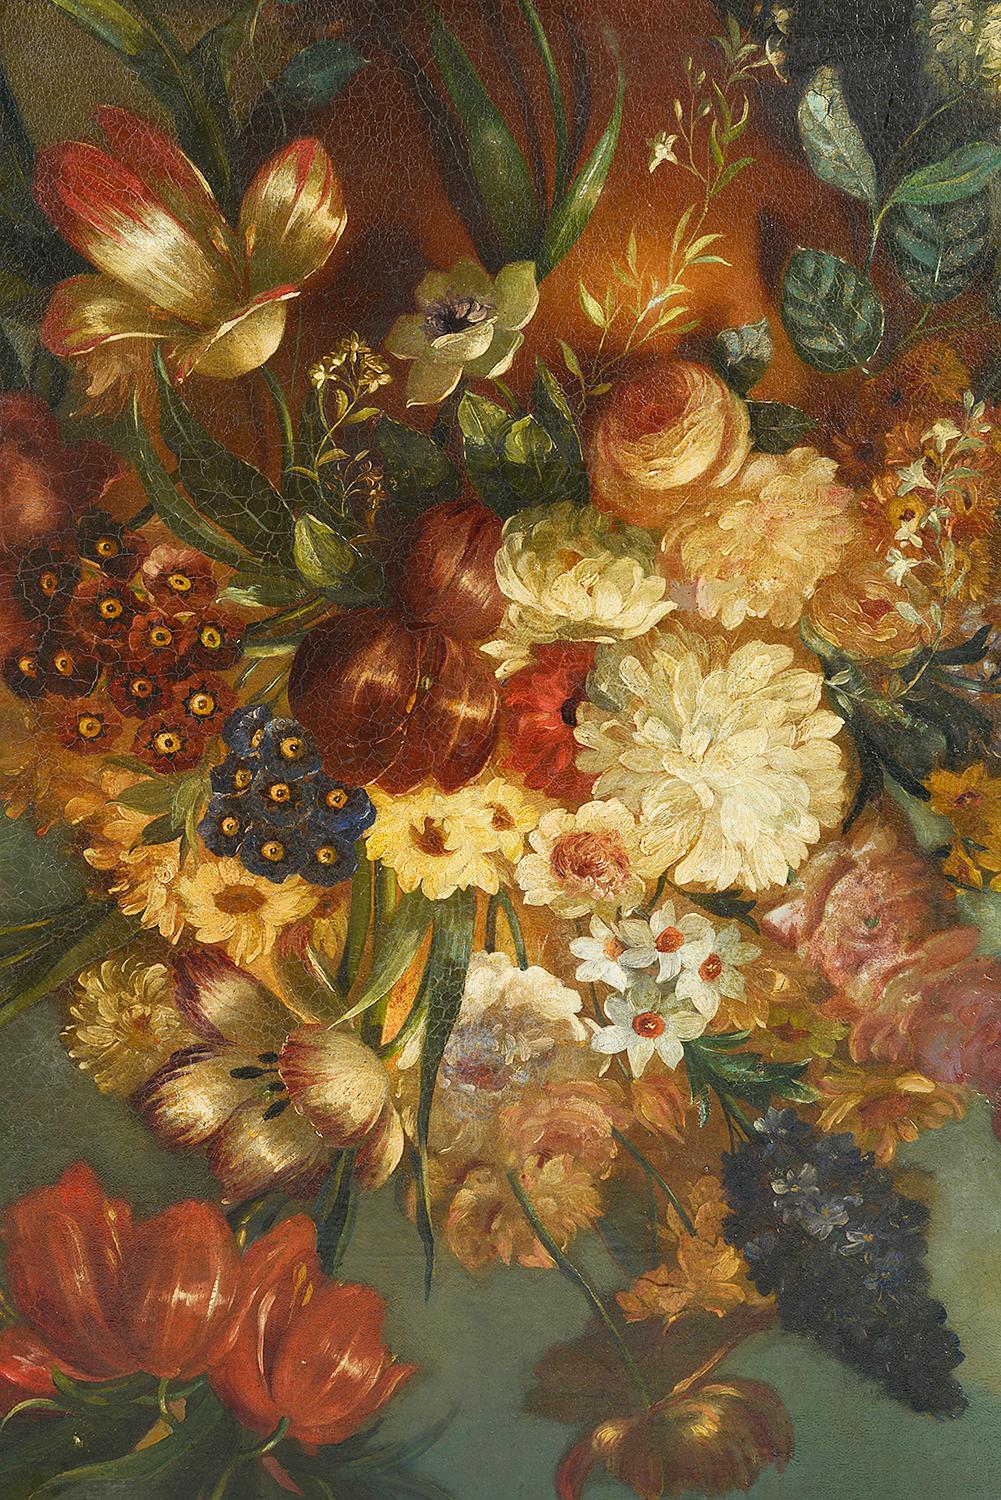 A very impressive 19th century oil on canvas still life painting of exotic flowers in a vase, in the 18th century style. Mounted in a gilded molded frame.